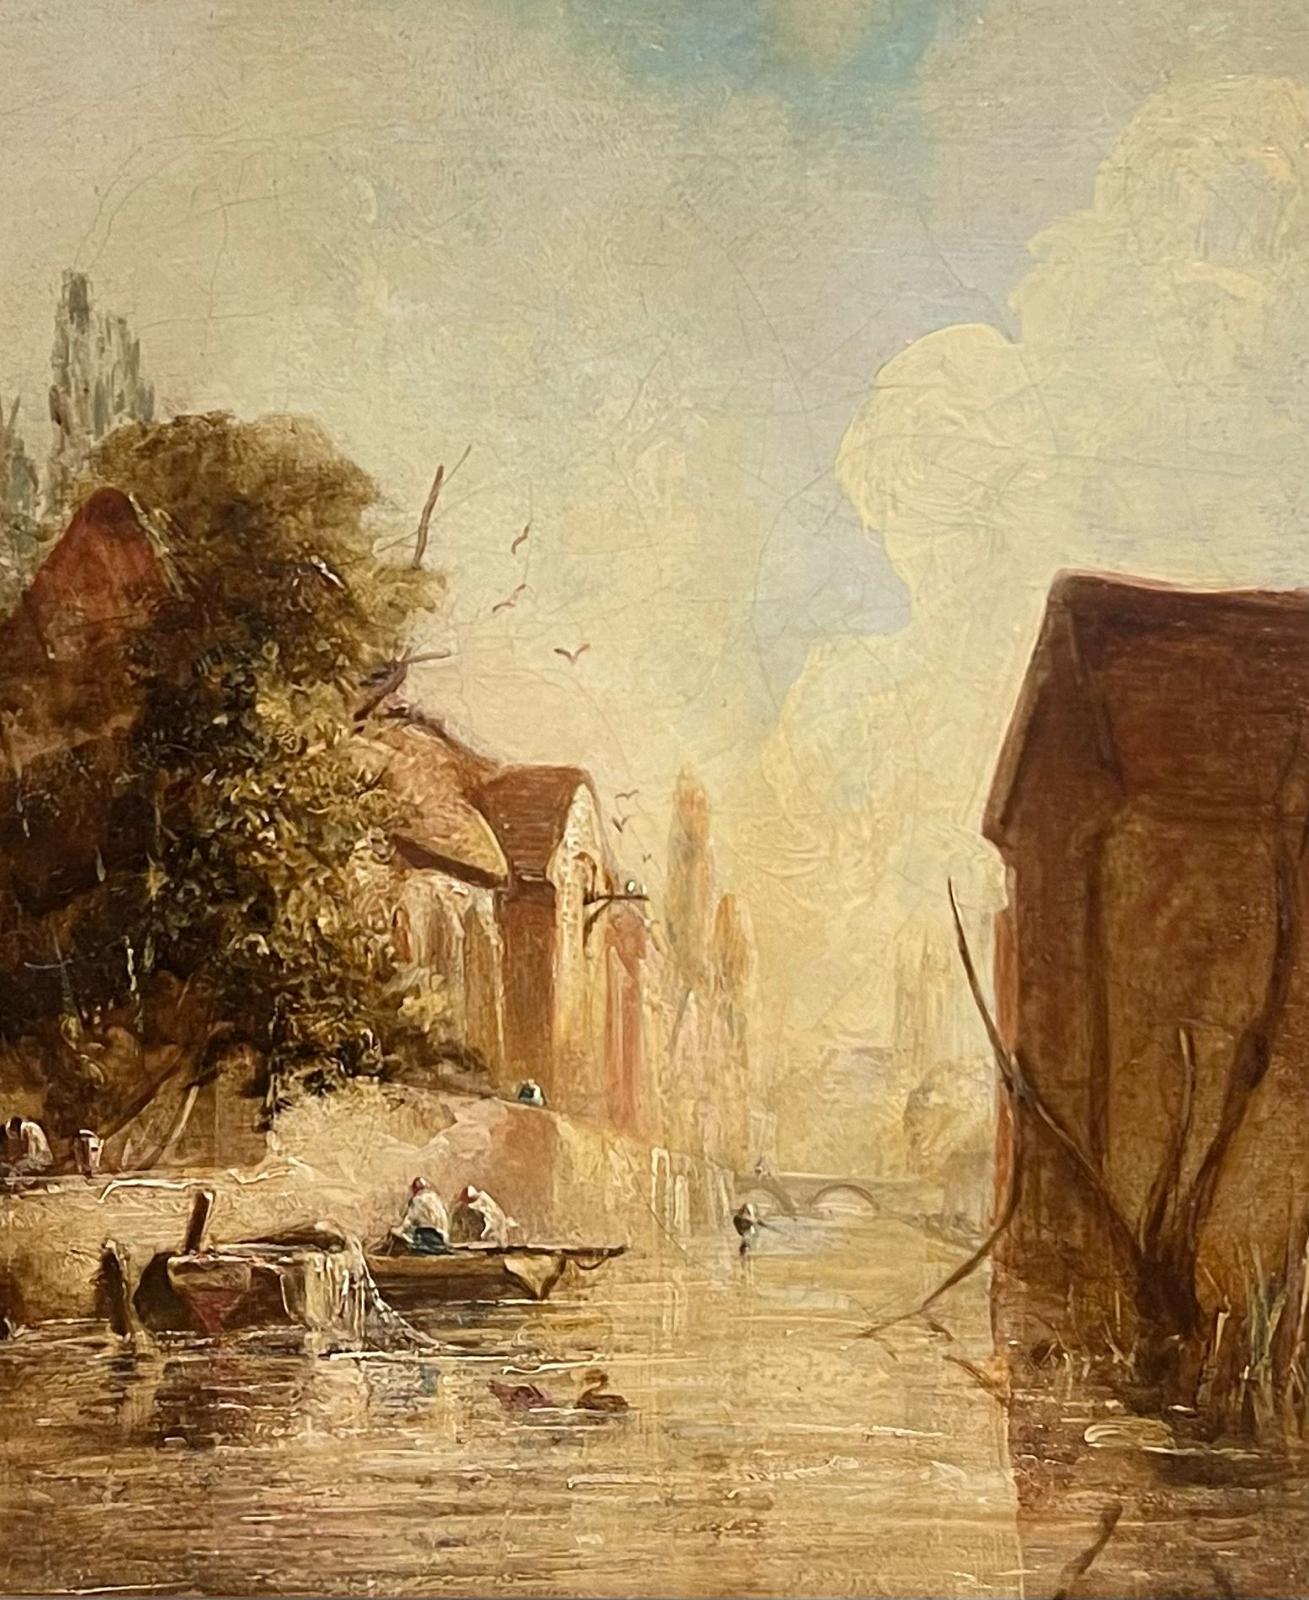 Tending the Boat
English School, 19th century
circle of William Joseph Julius Caesar Bond (British 1833-1928)
oil on canvas, framed
framed: 17 x 15 inches
canvas: 12 x 10 inches
provenance: private collection, UK
condition: very good and sound